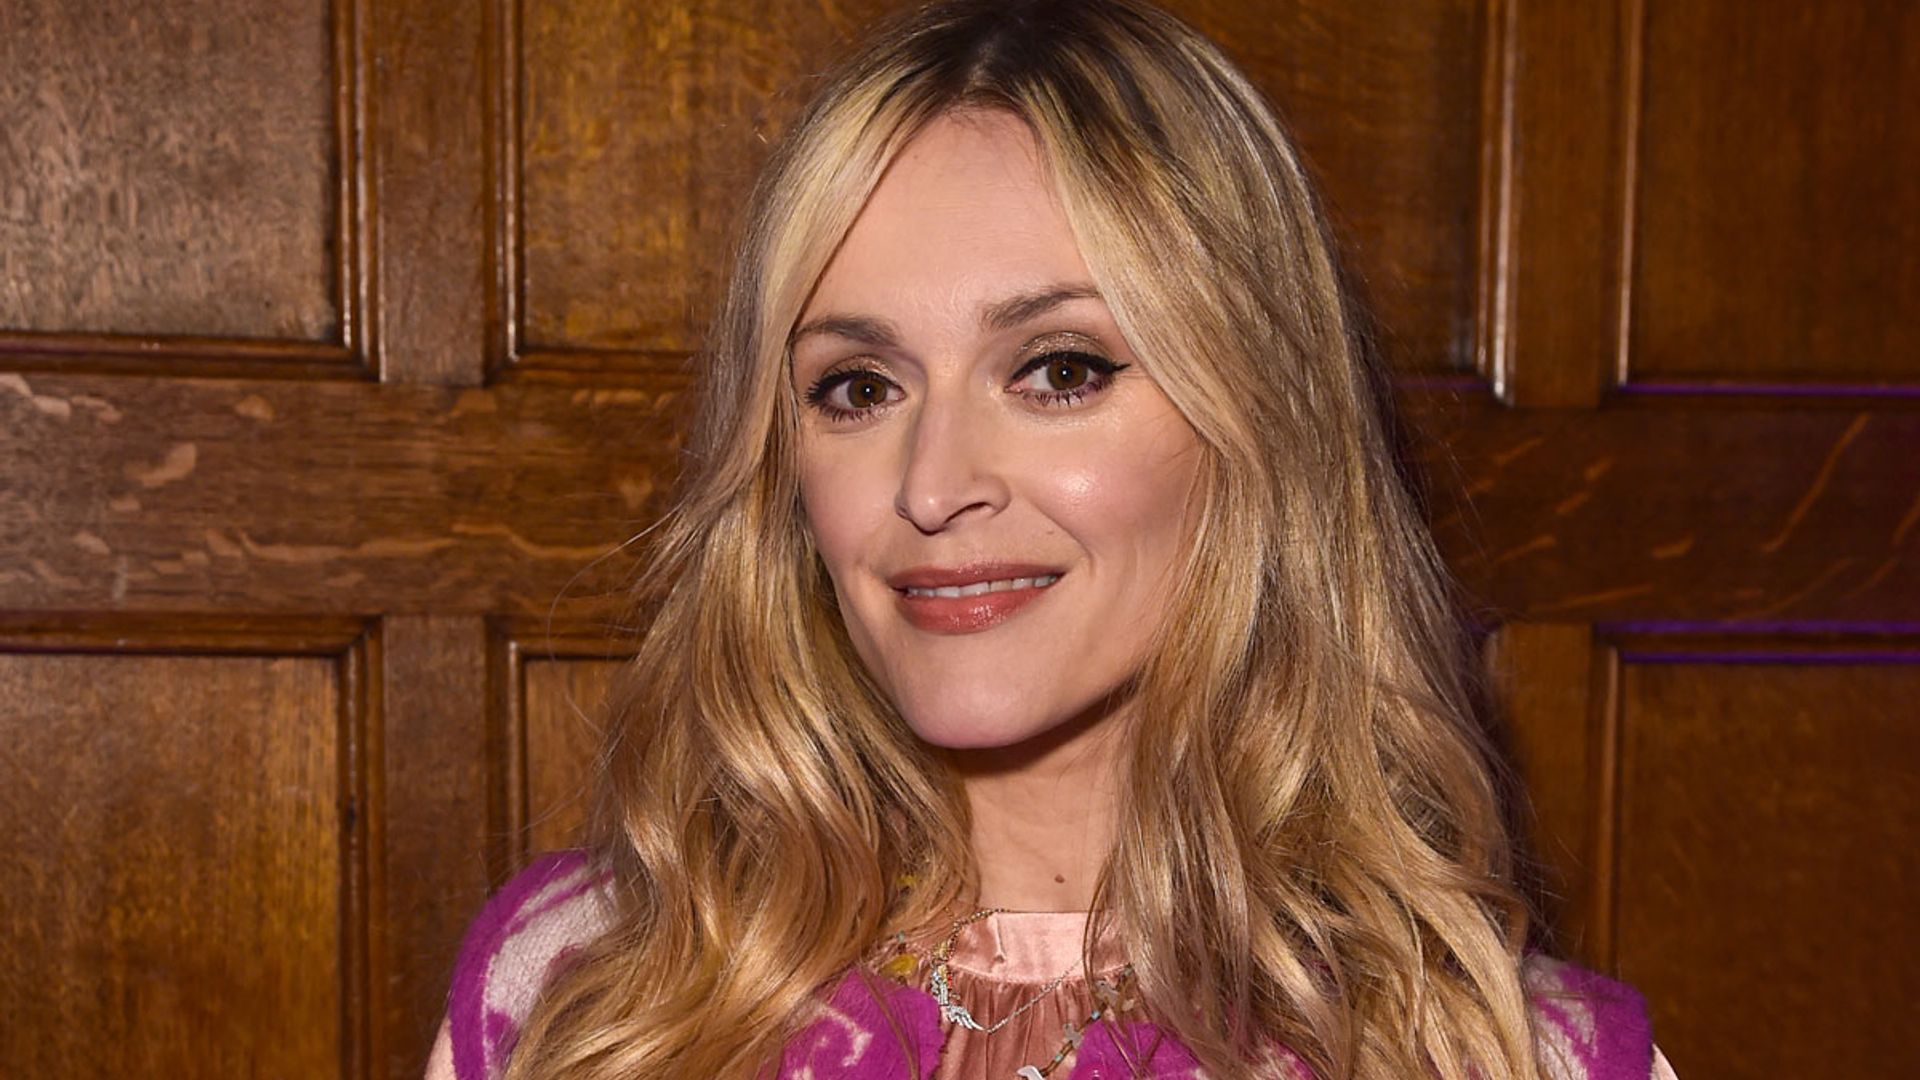 Fearne Cotton inundated with support after she admits 'sky high' anxiety